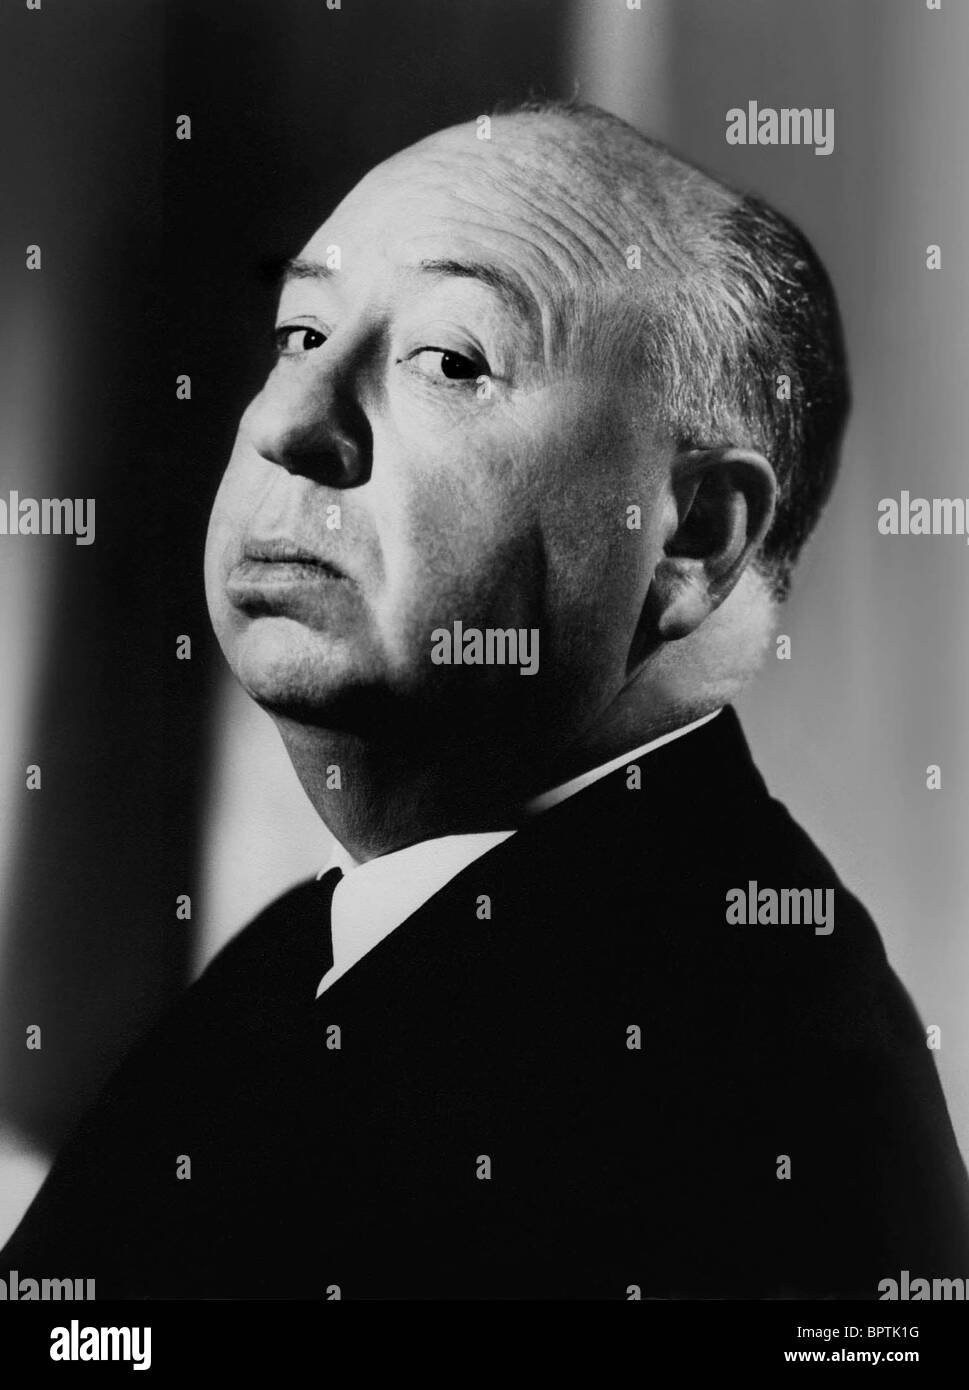 ALFRED HITCHCOCK DIRECTOR (1970) Stock Photo